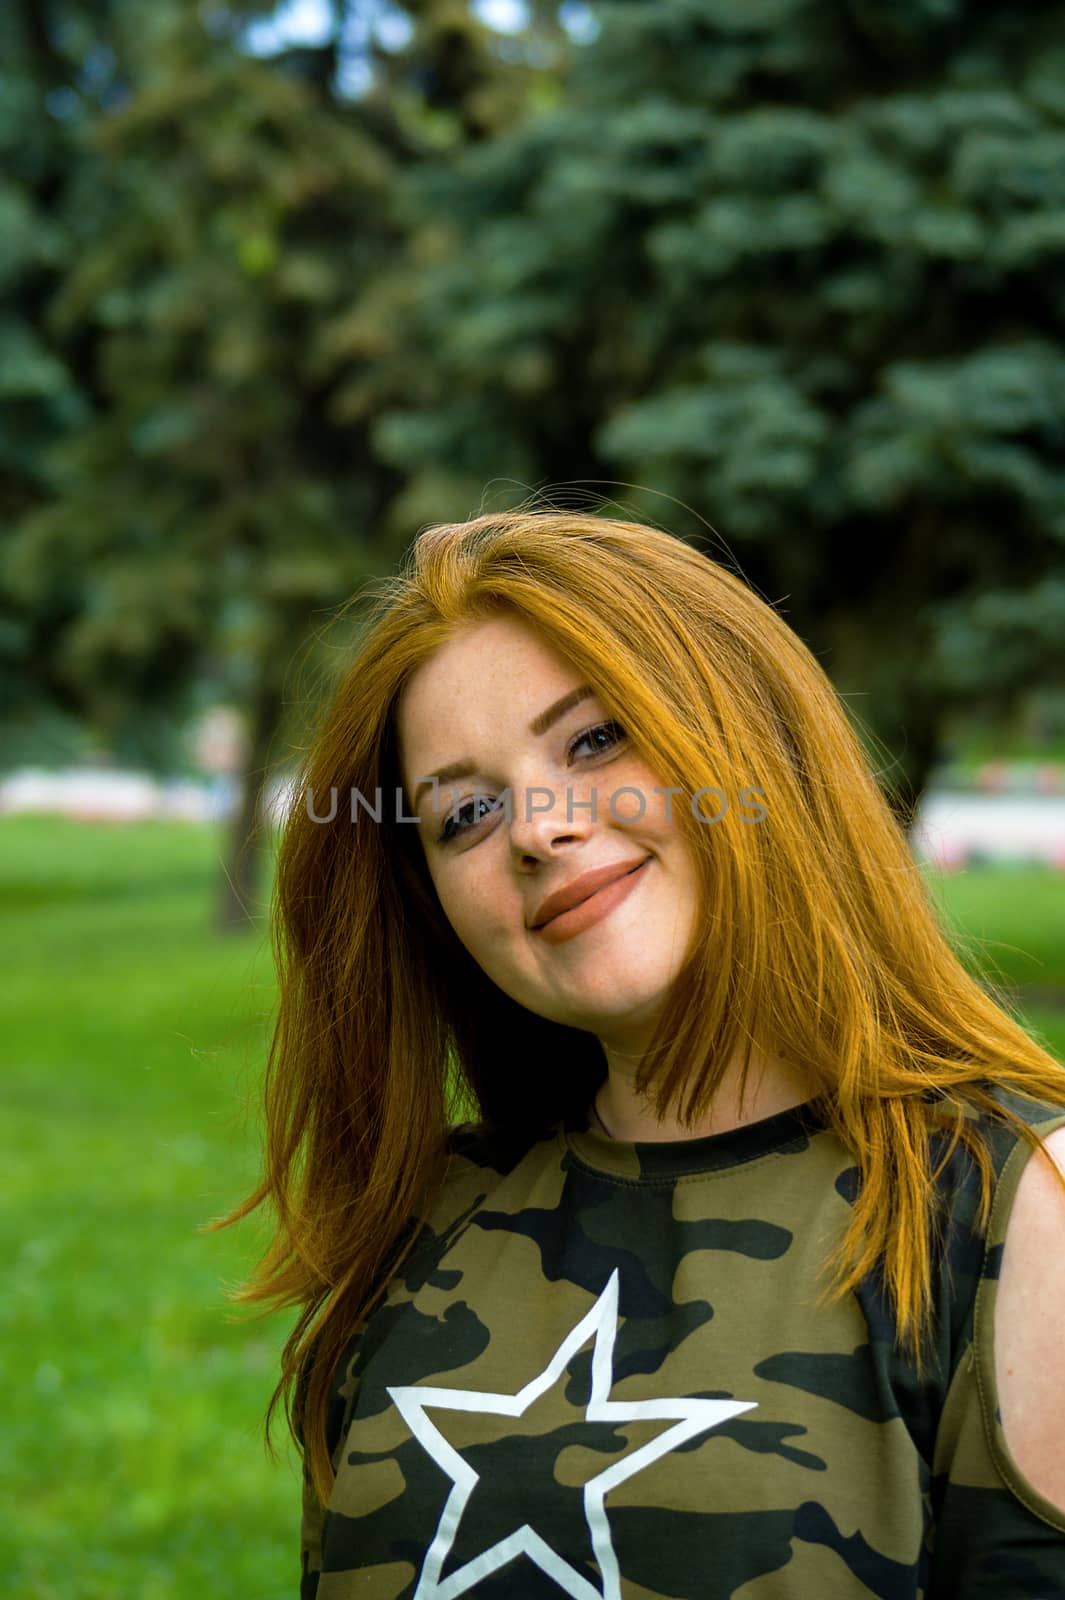 Pretty redhead girl shoot on outdoor park by alexsdriver